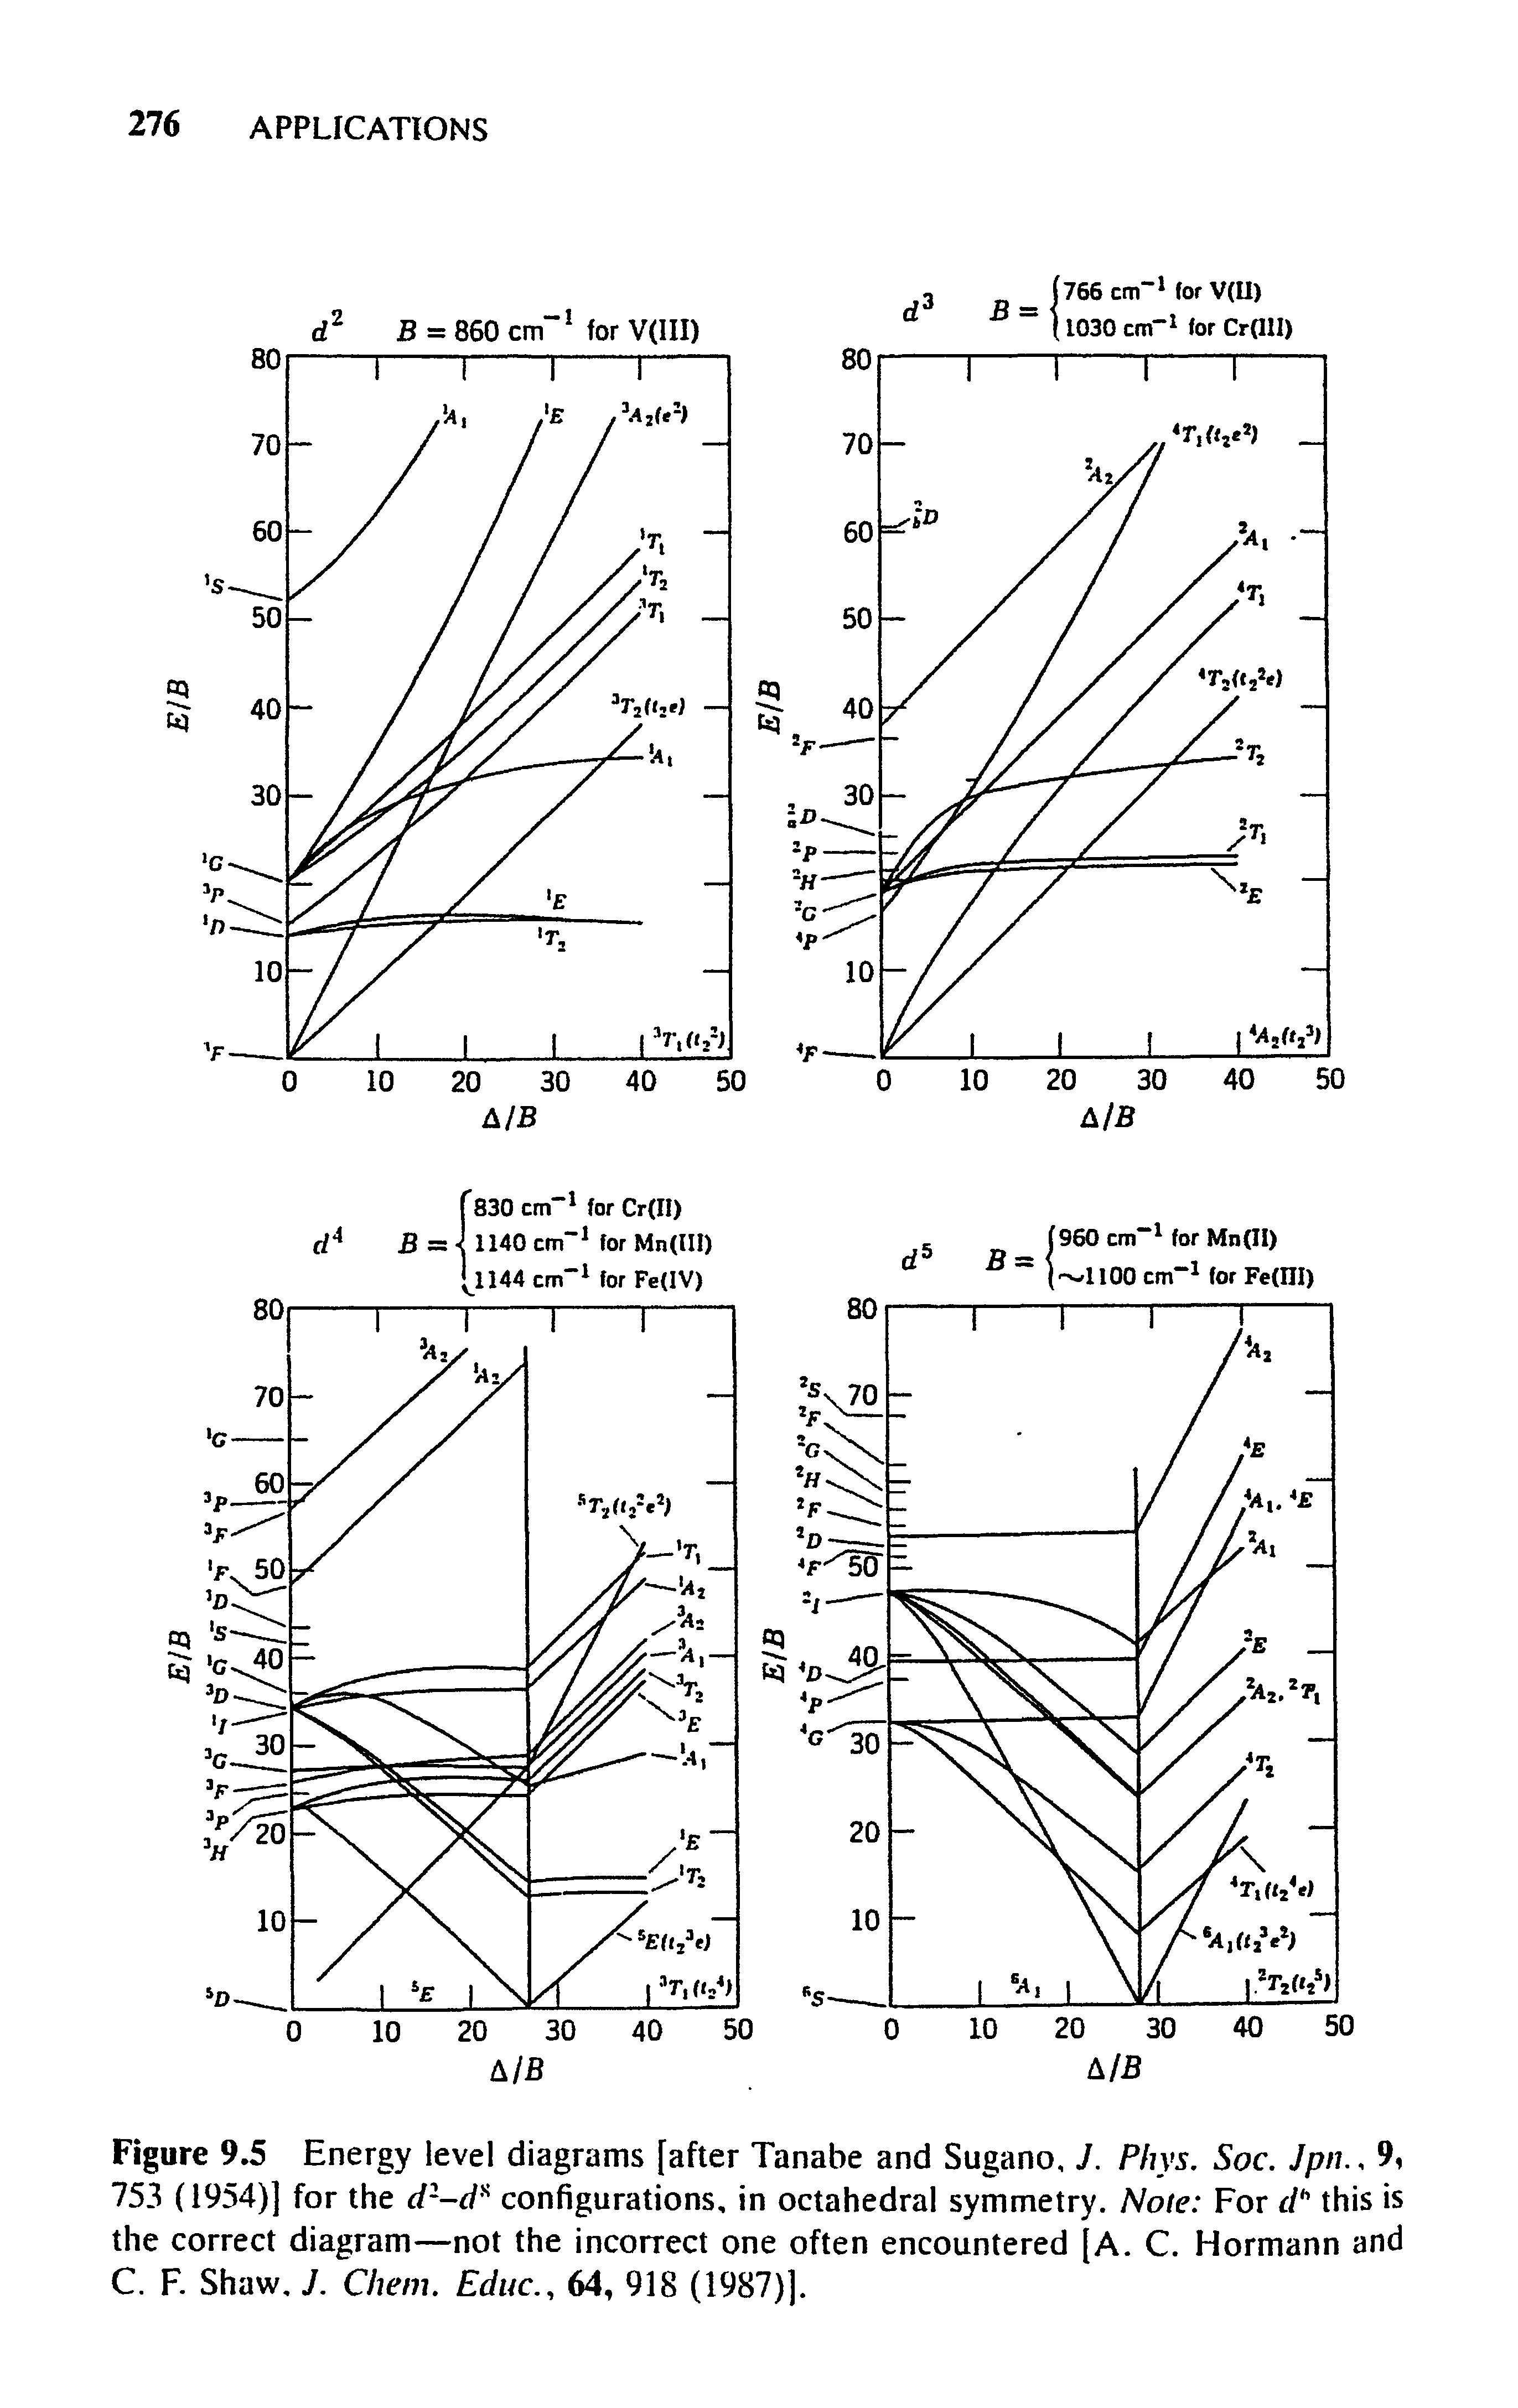 Figure 9.5 Energy level diagrams [after Tanabe and Sugano, J. Phys. Soc. Jpn., 9, 753 (1954)] for the d2-d configurations, in octahedral symmetry. Note For dh this is the correct diagram—not the incorrect one often encountered [A. C. Hormann and C. F. Shaw. J. Chem. Educ64, 918 (1987)].